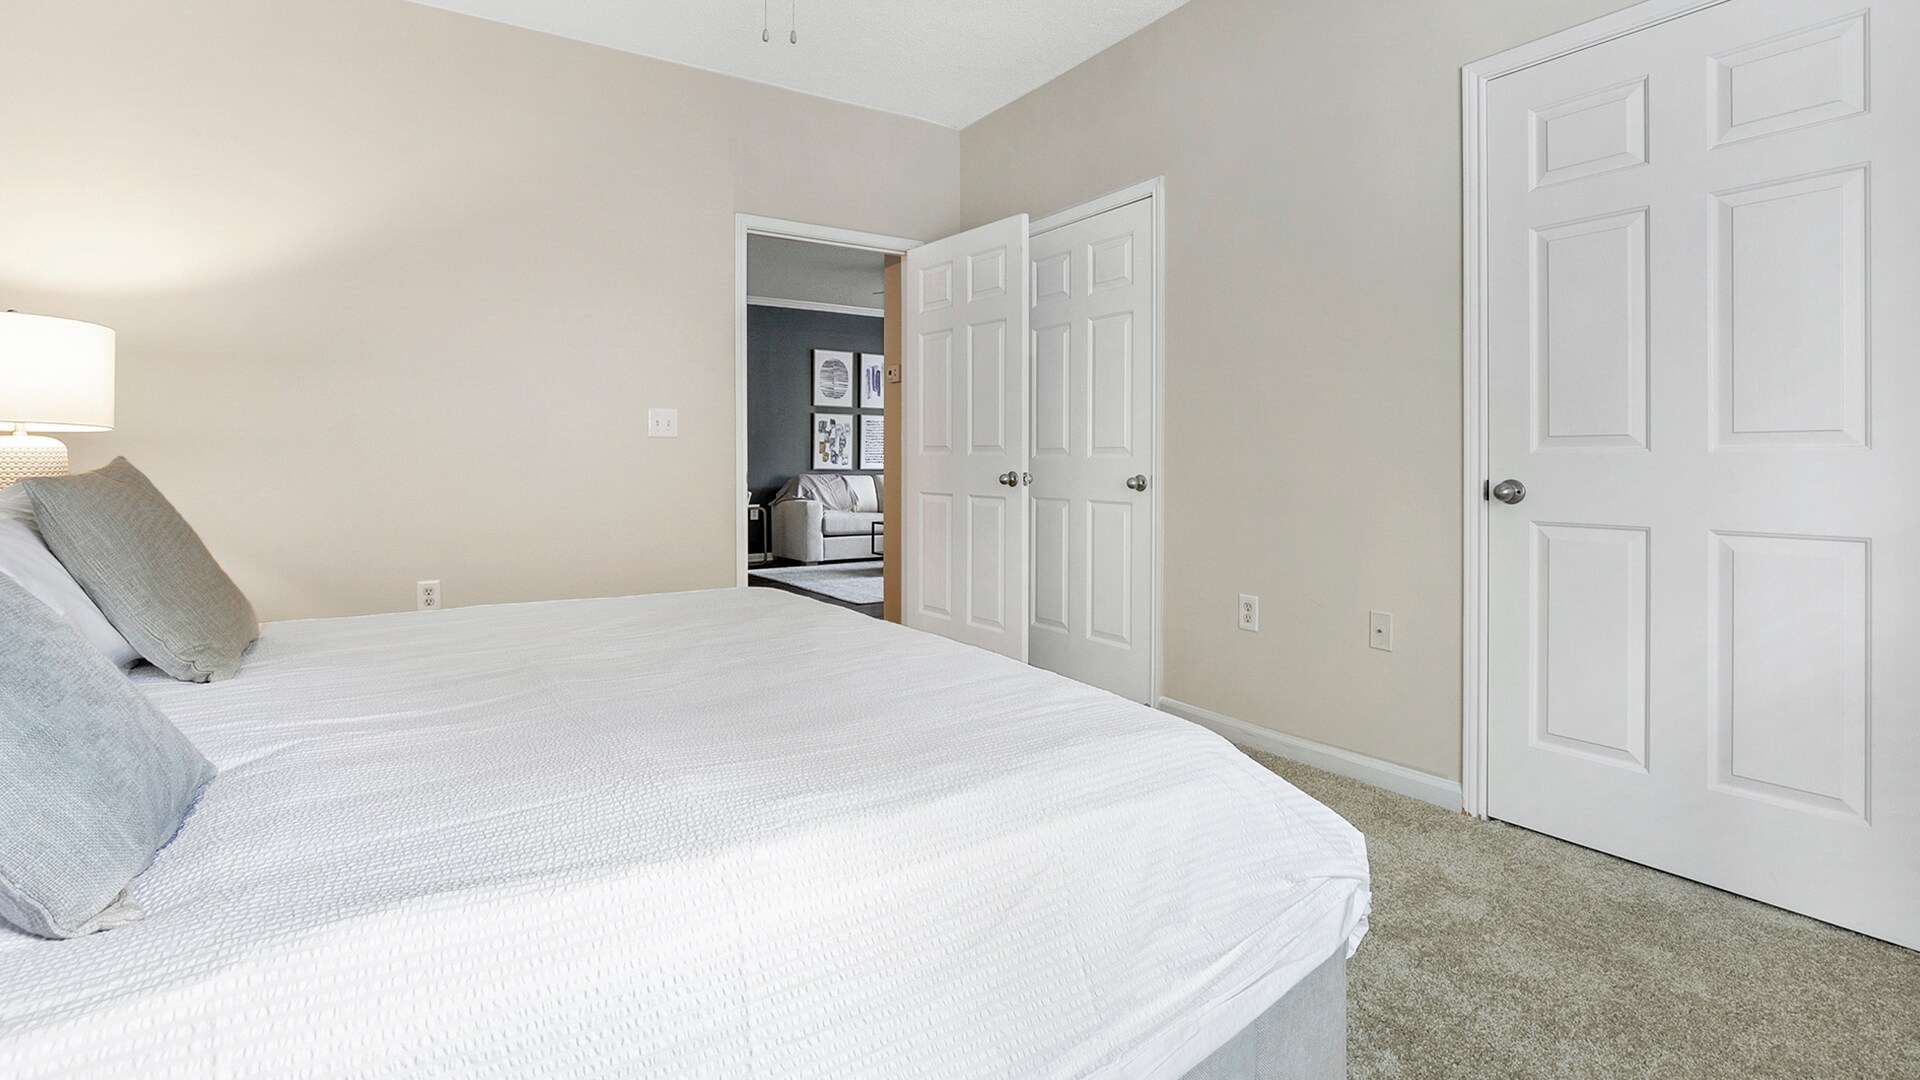 Well-appointed One Bedrooom in the Heart of High Point